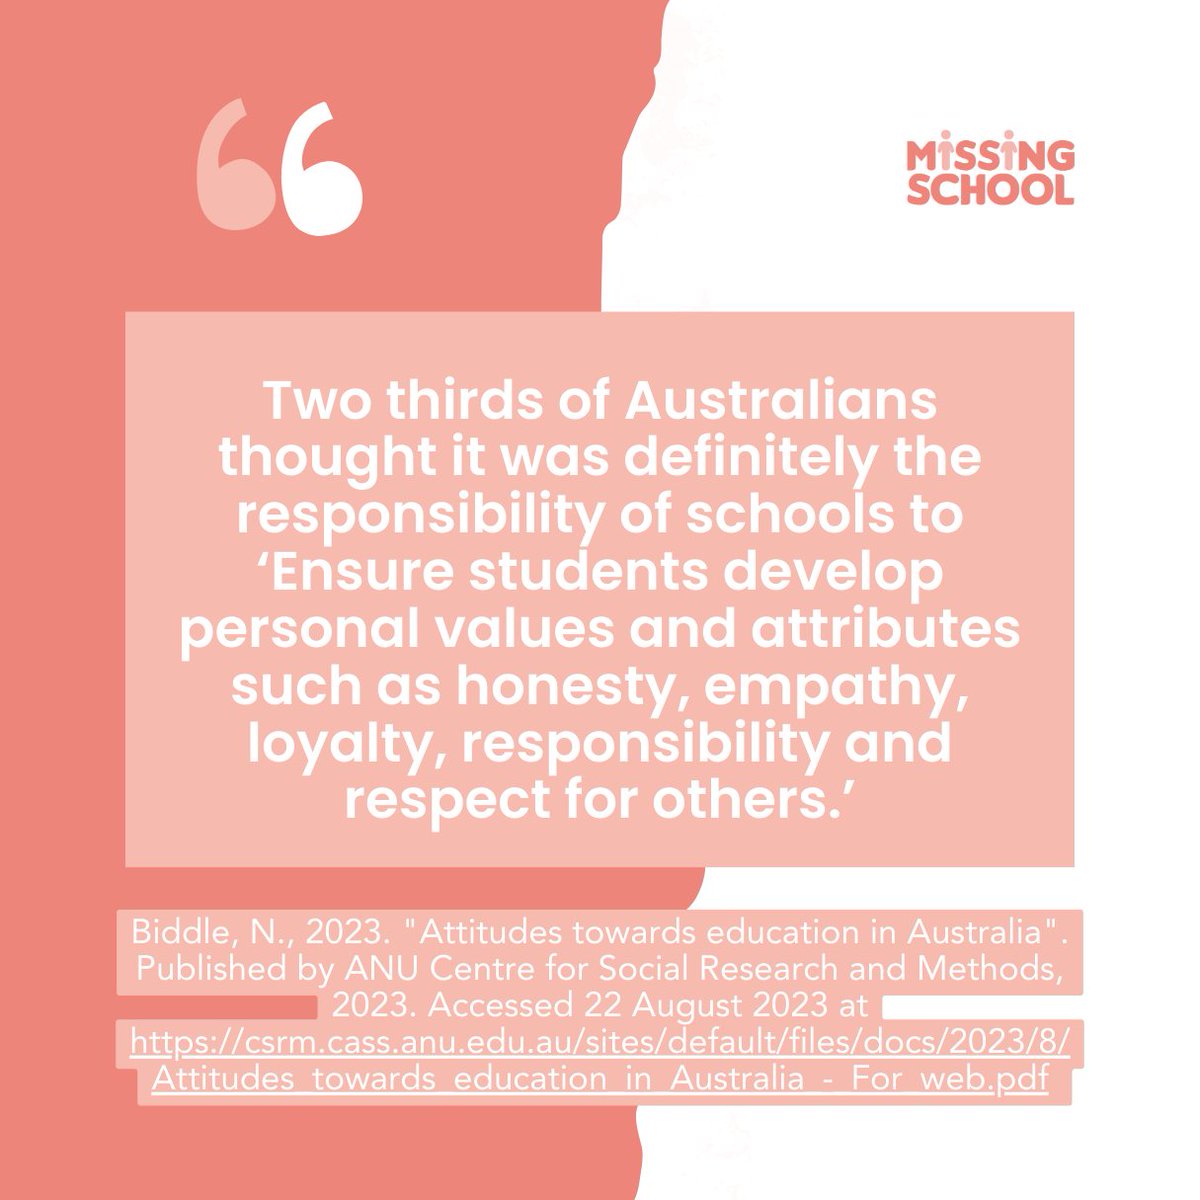 Did you know? Over two thirds of Australians role of schools to ‘Ensure students develop personal values and attributes such as honesty, empathy, loyalty, responsibility and respect for others.’ We must ensure every student can stay connected to their community. #seenandheard